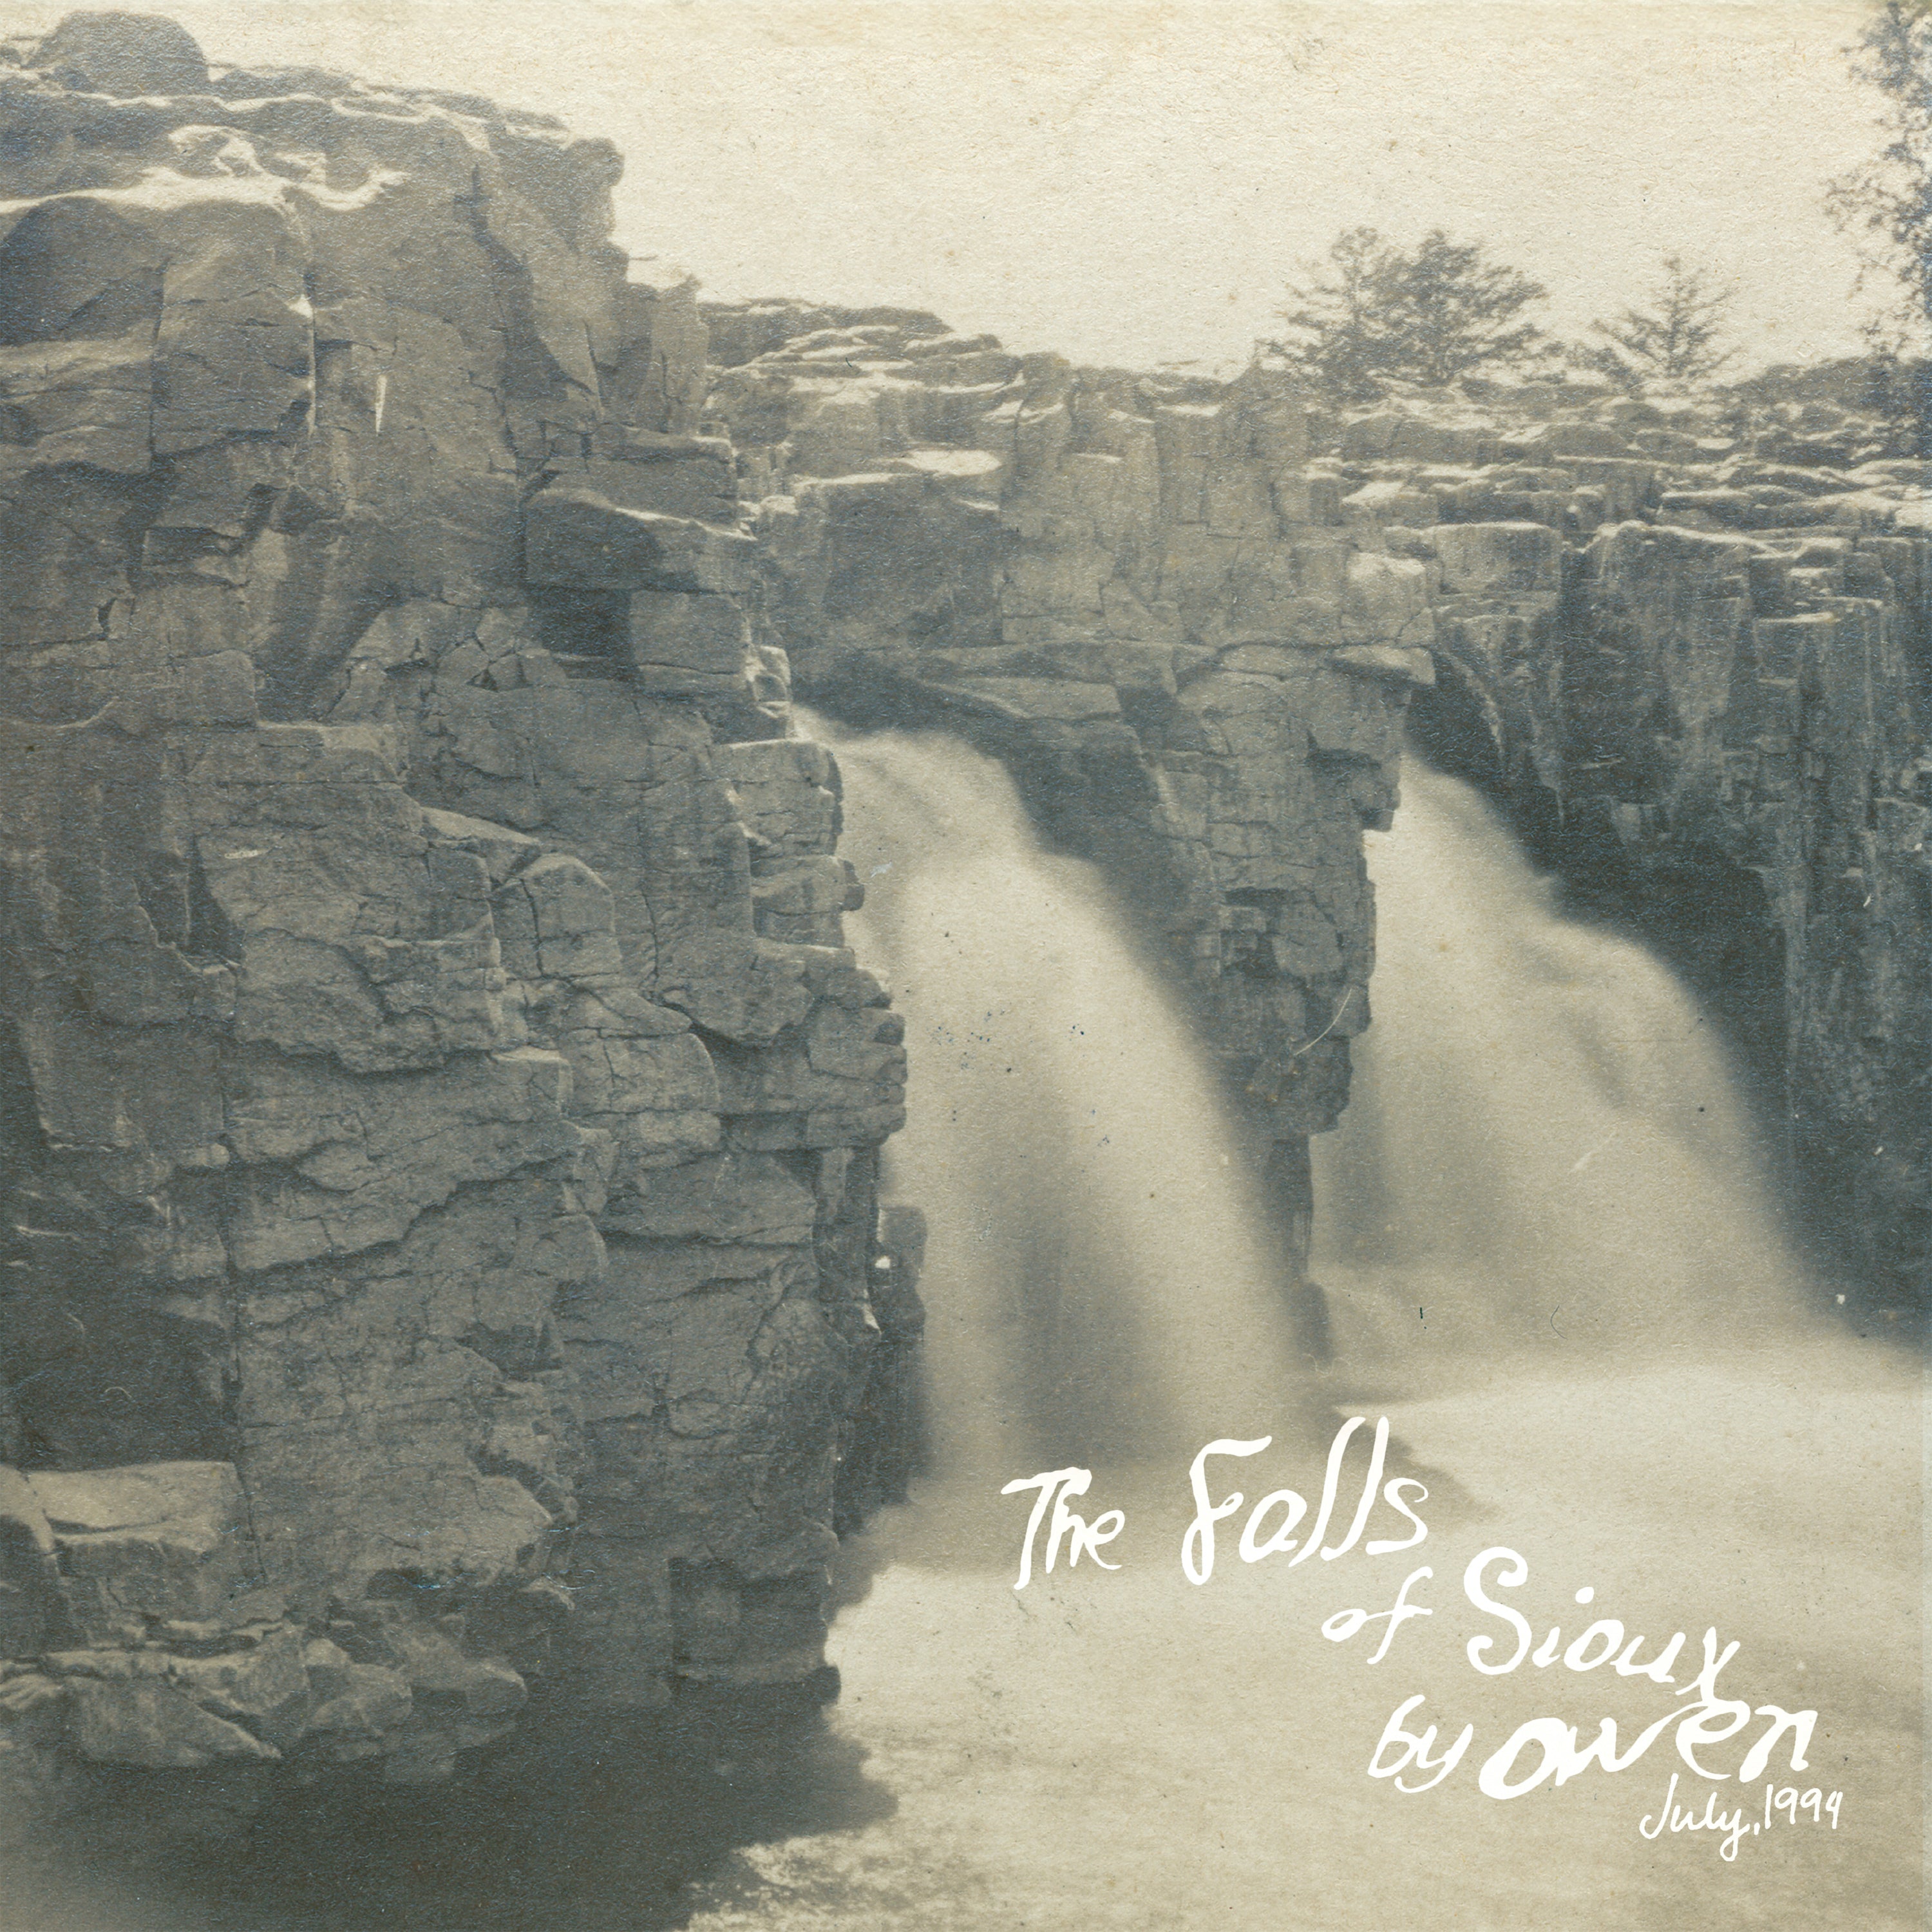 Owen - The Falls Of Sioux